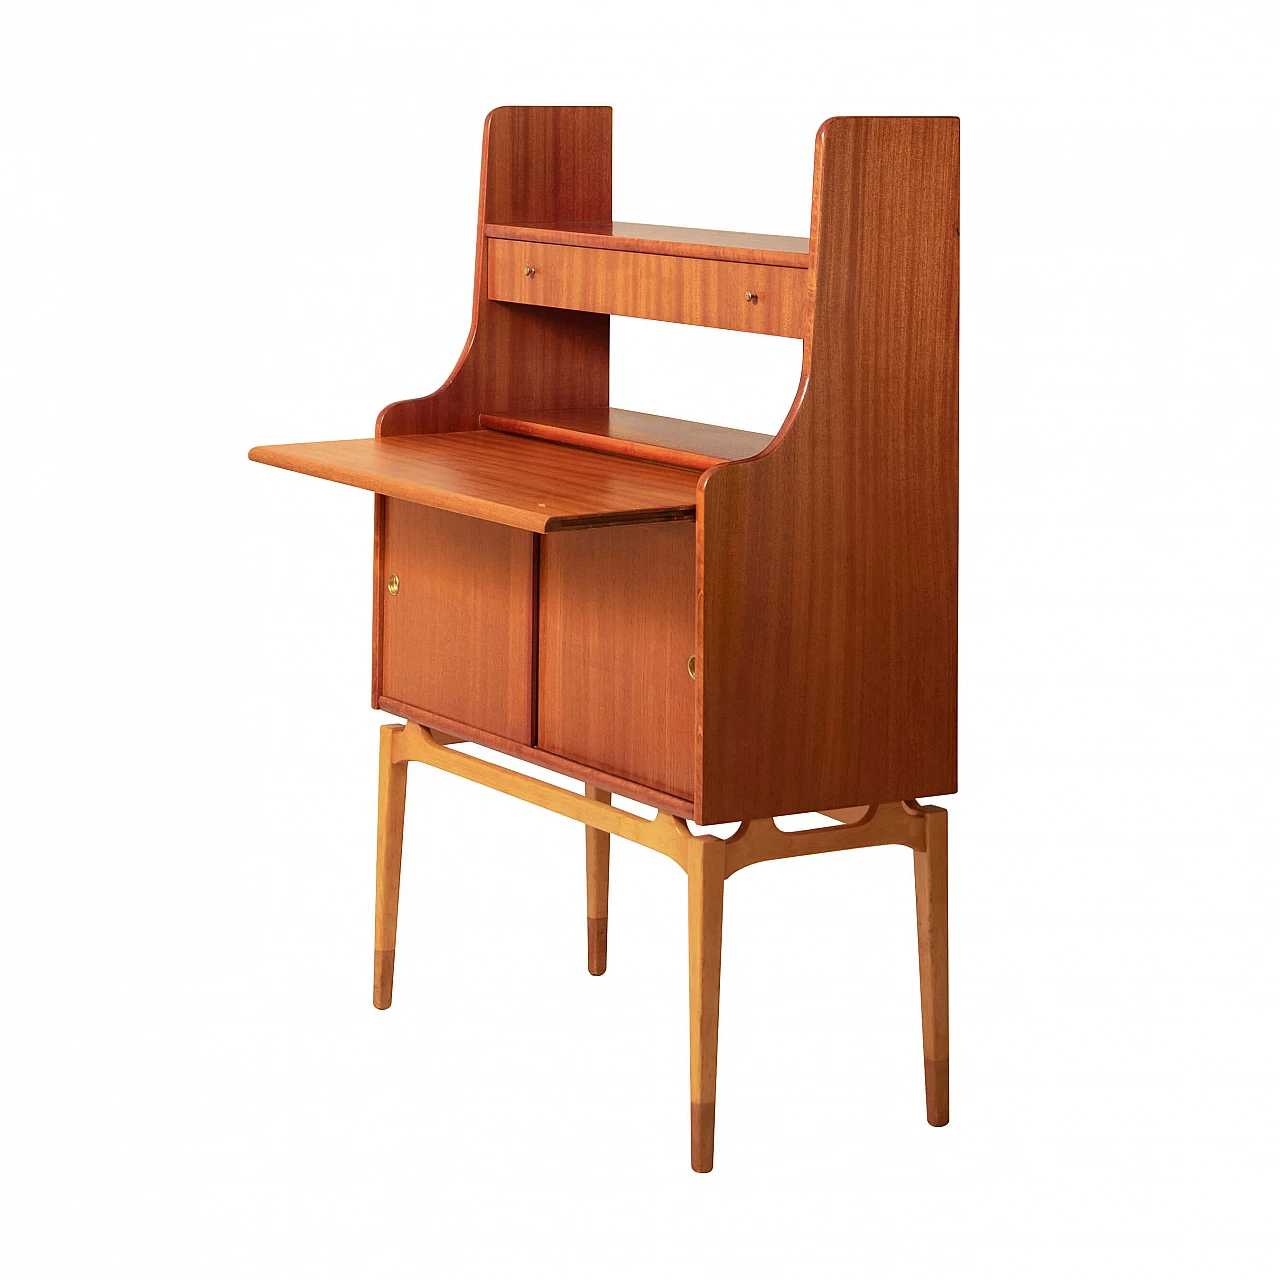 Cabinet with pull-out top, 1950s 1120366